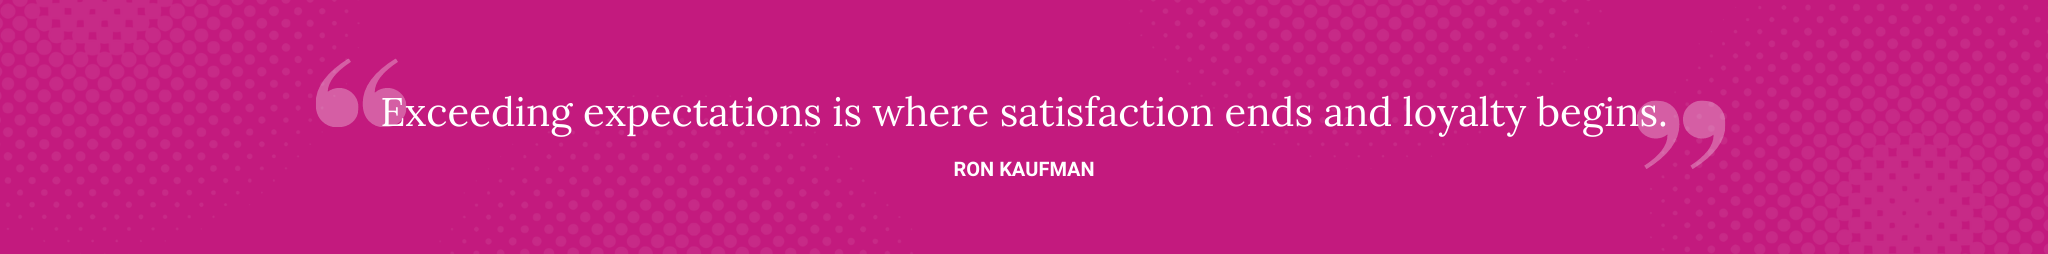 Ron Kaufman Quote for 50 Customer Service Stats Quotes and Facts - Brittany Hodak